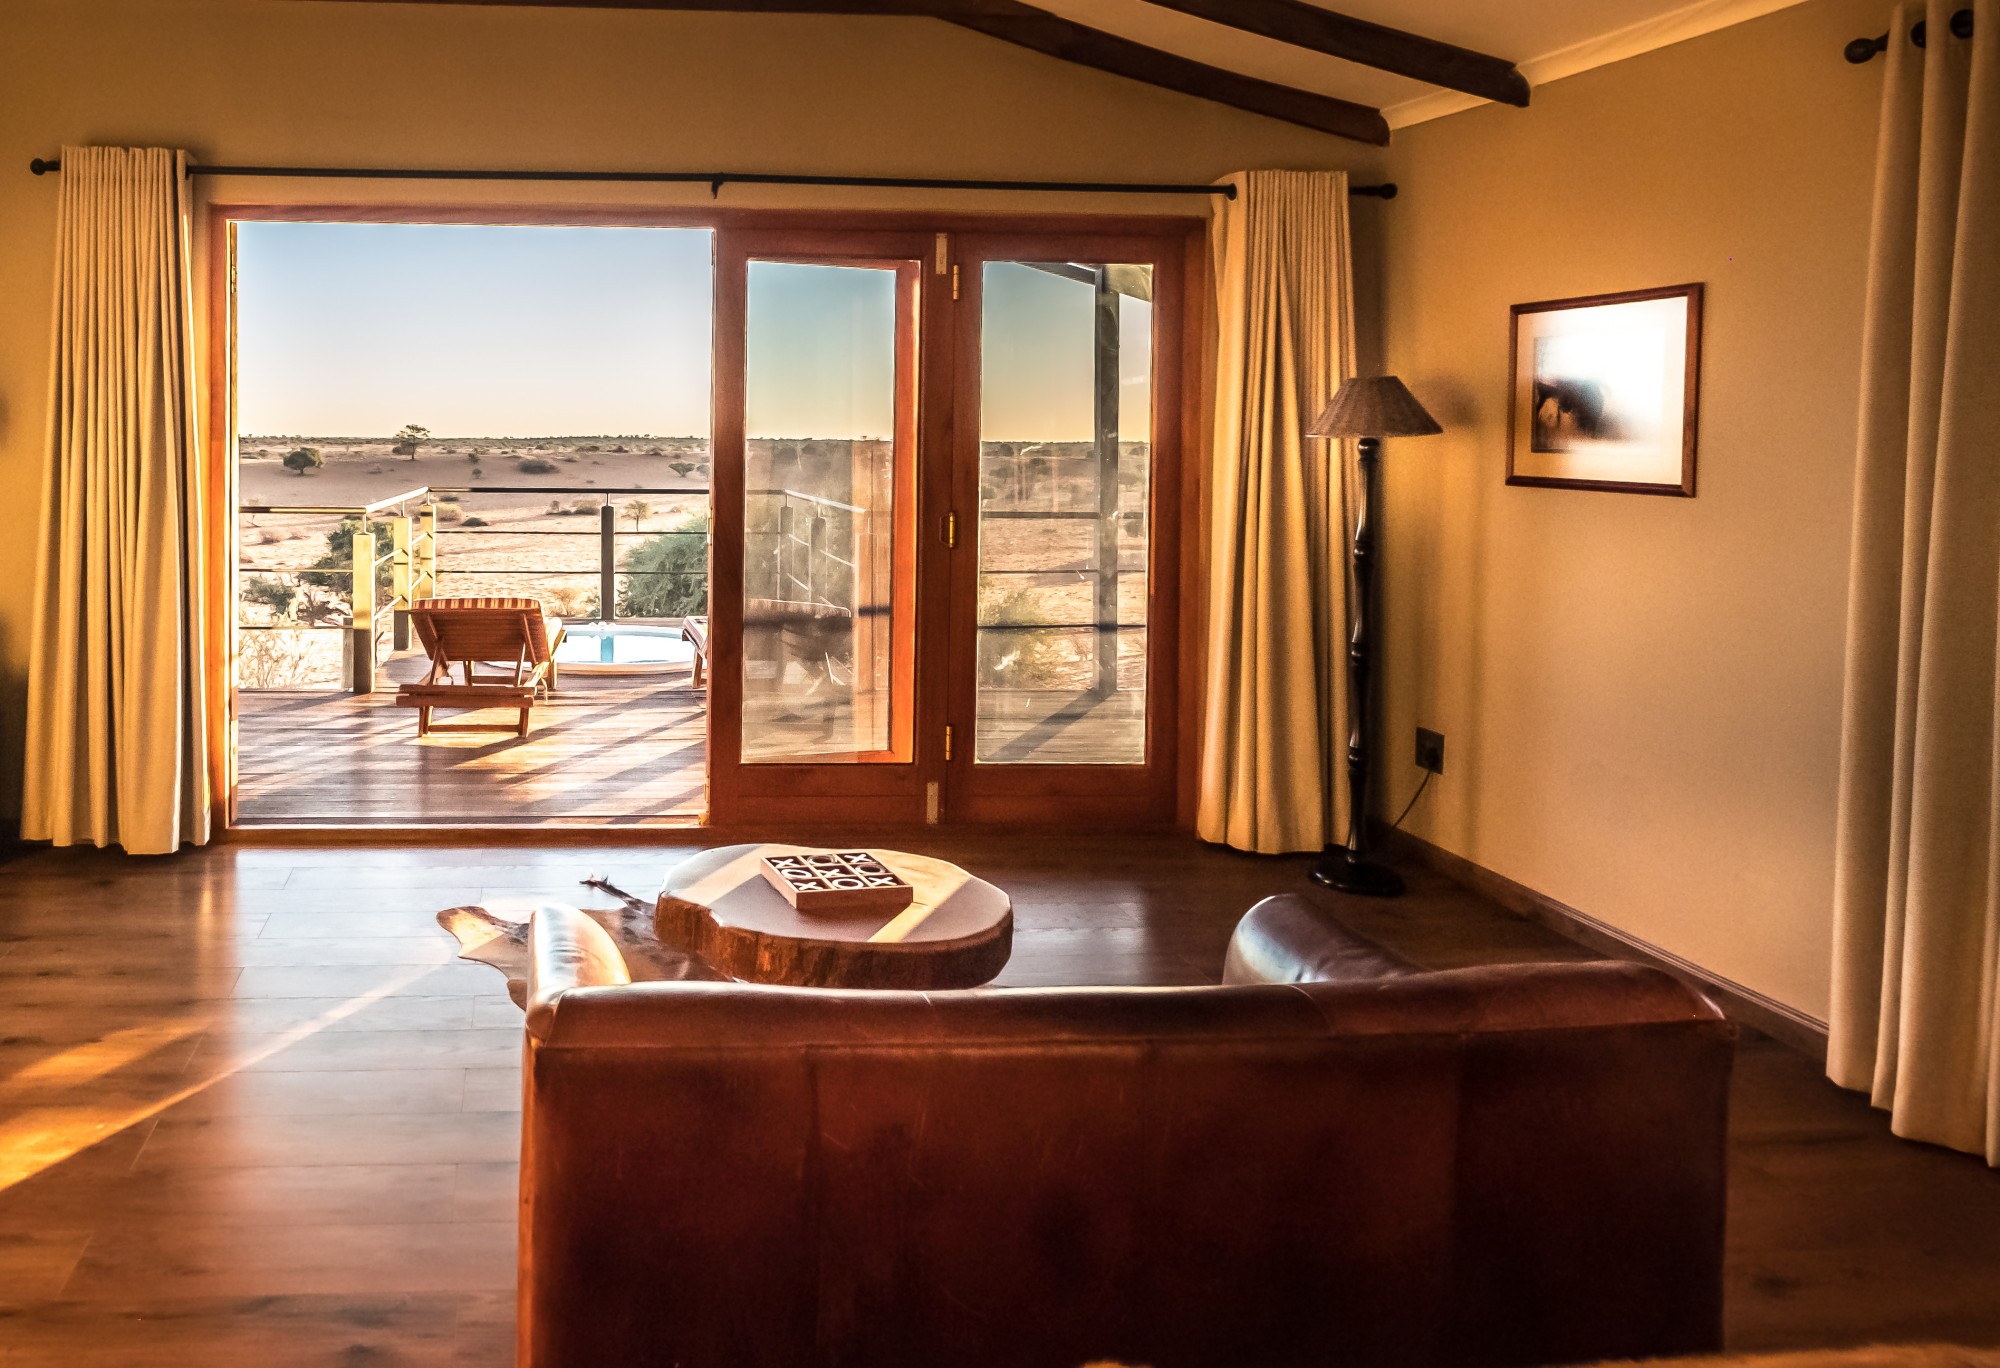 Bagatelle Lodge - Kalahari Game Ranch - Namibia - Guest room lounge with view